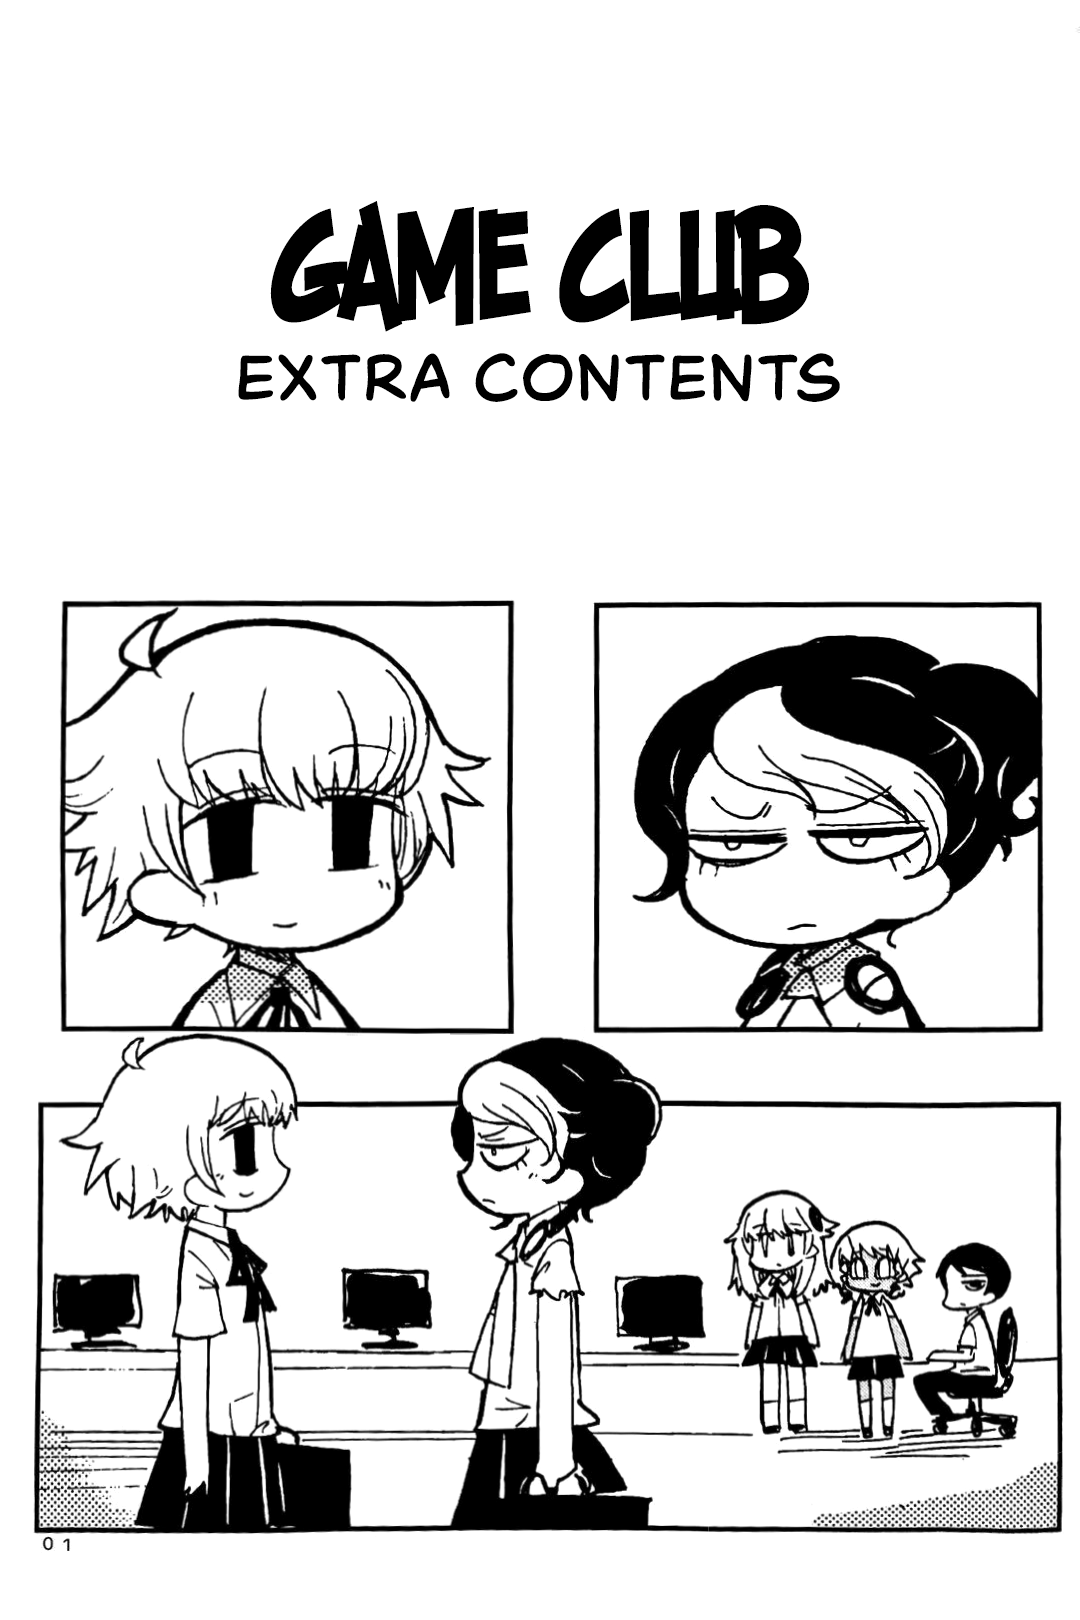 Game Club Vol.12 Chapter 27.1: Extra Contents - 1 - Picture 2